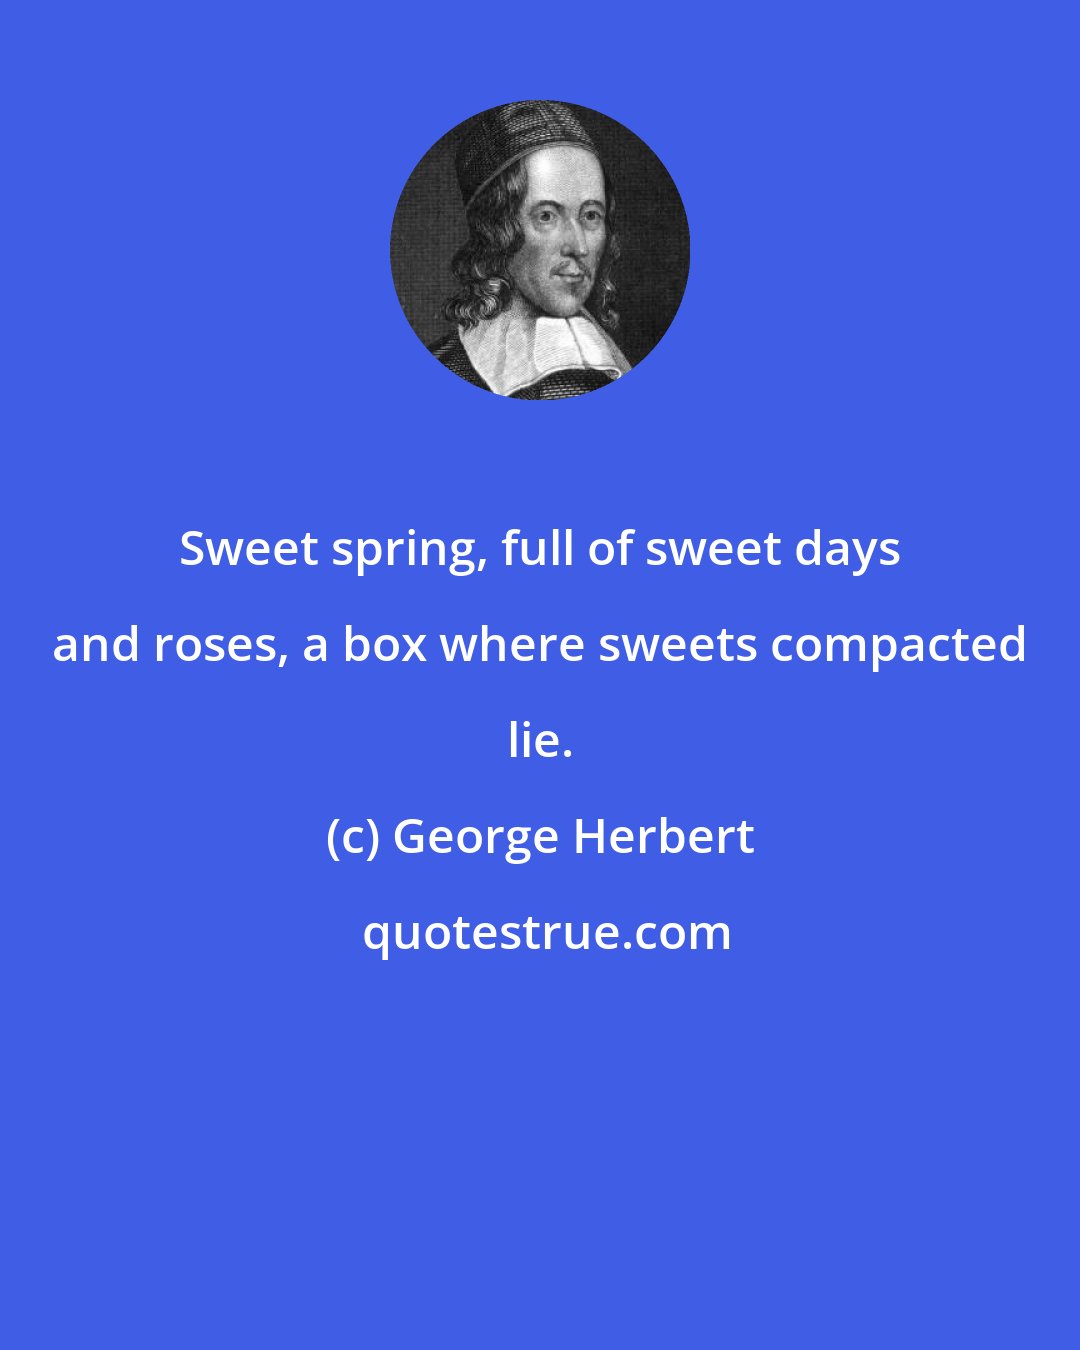 George Herbert: Sweet spring, full of sweet days and roses, a box where sweets compacted lie.